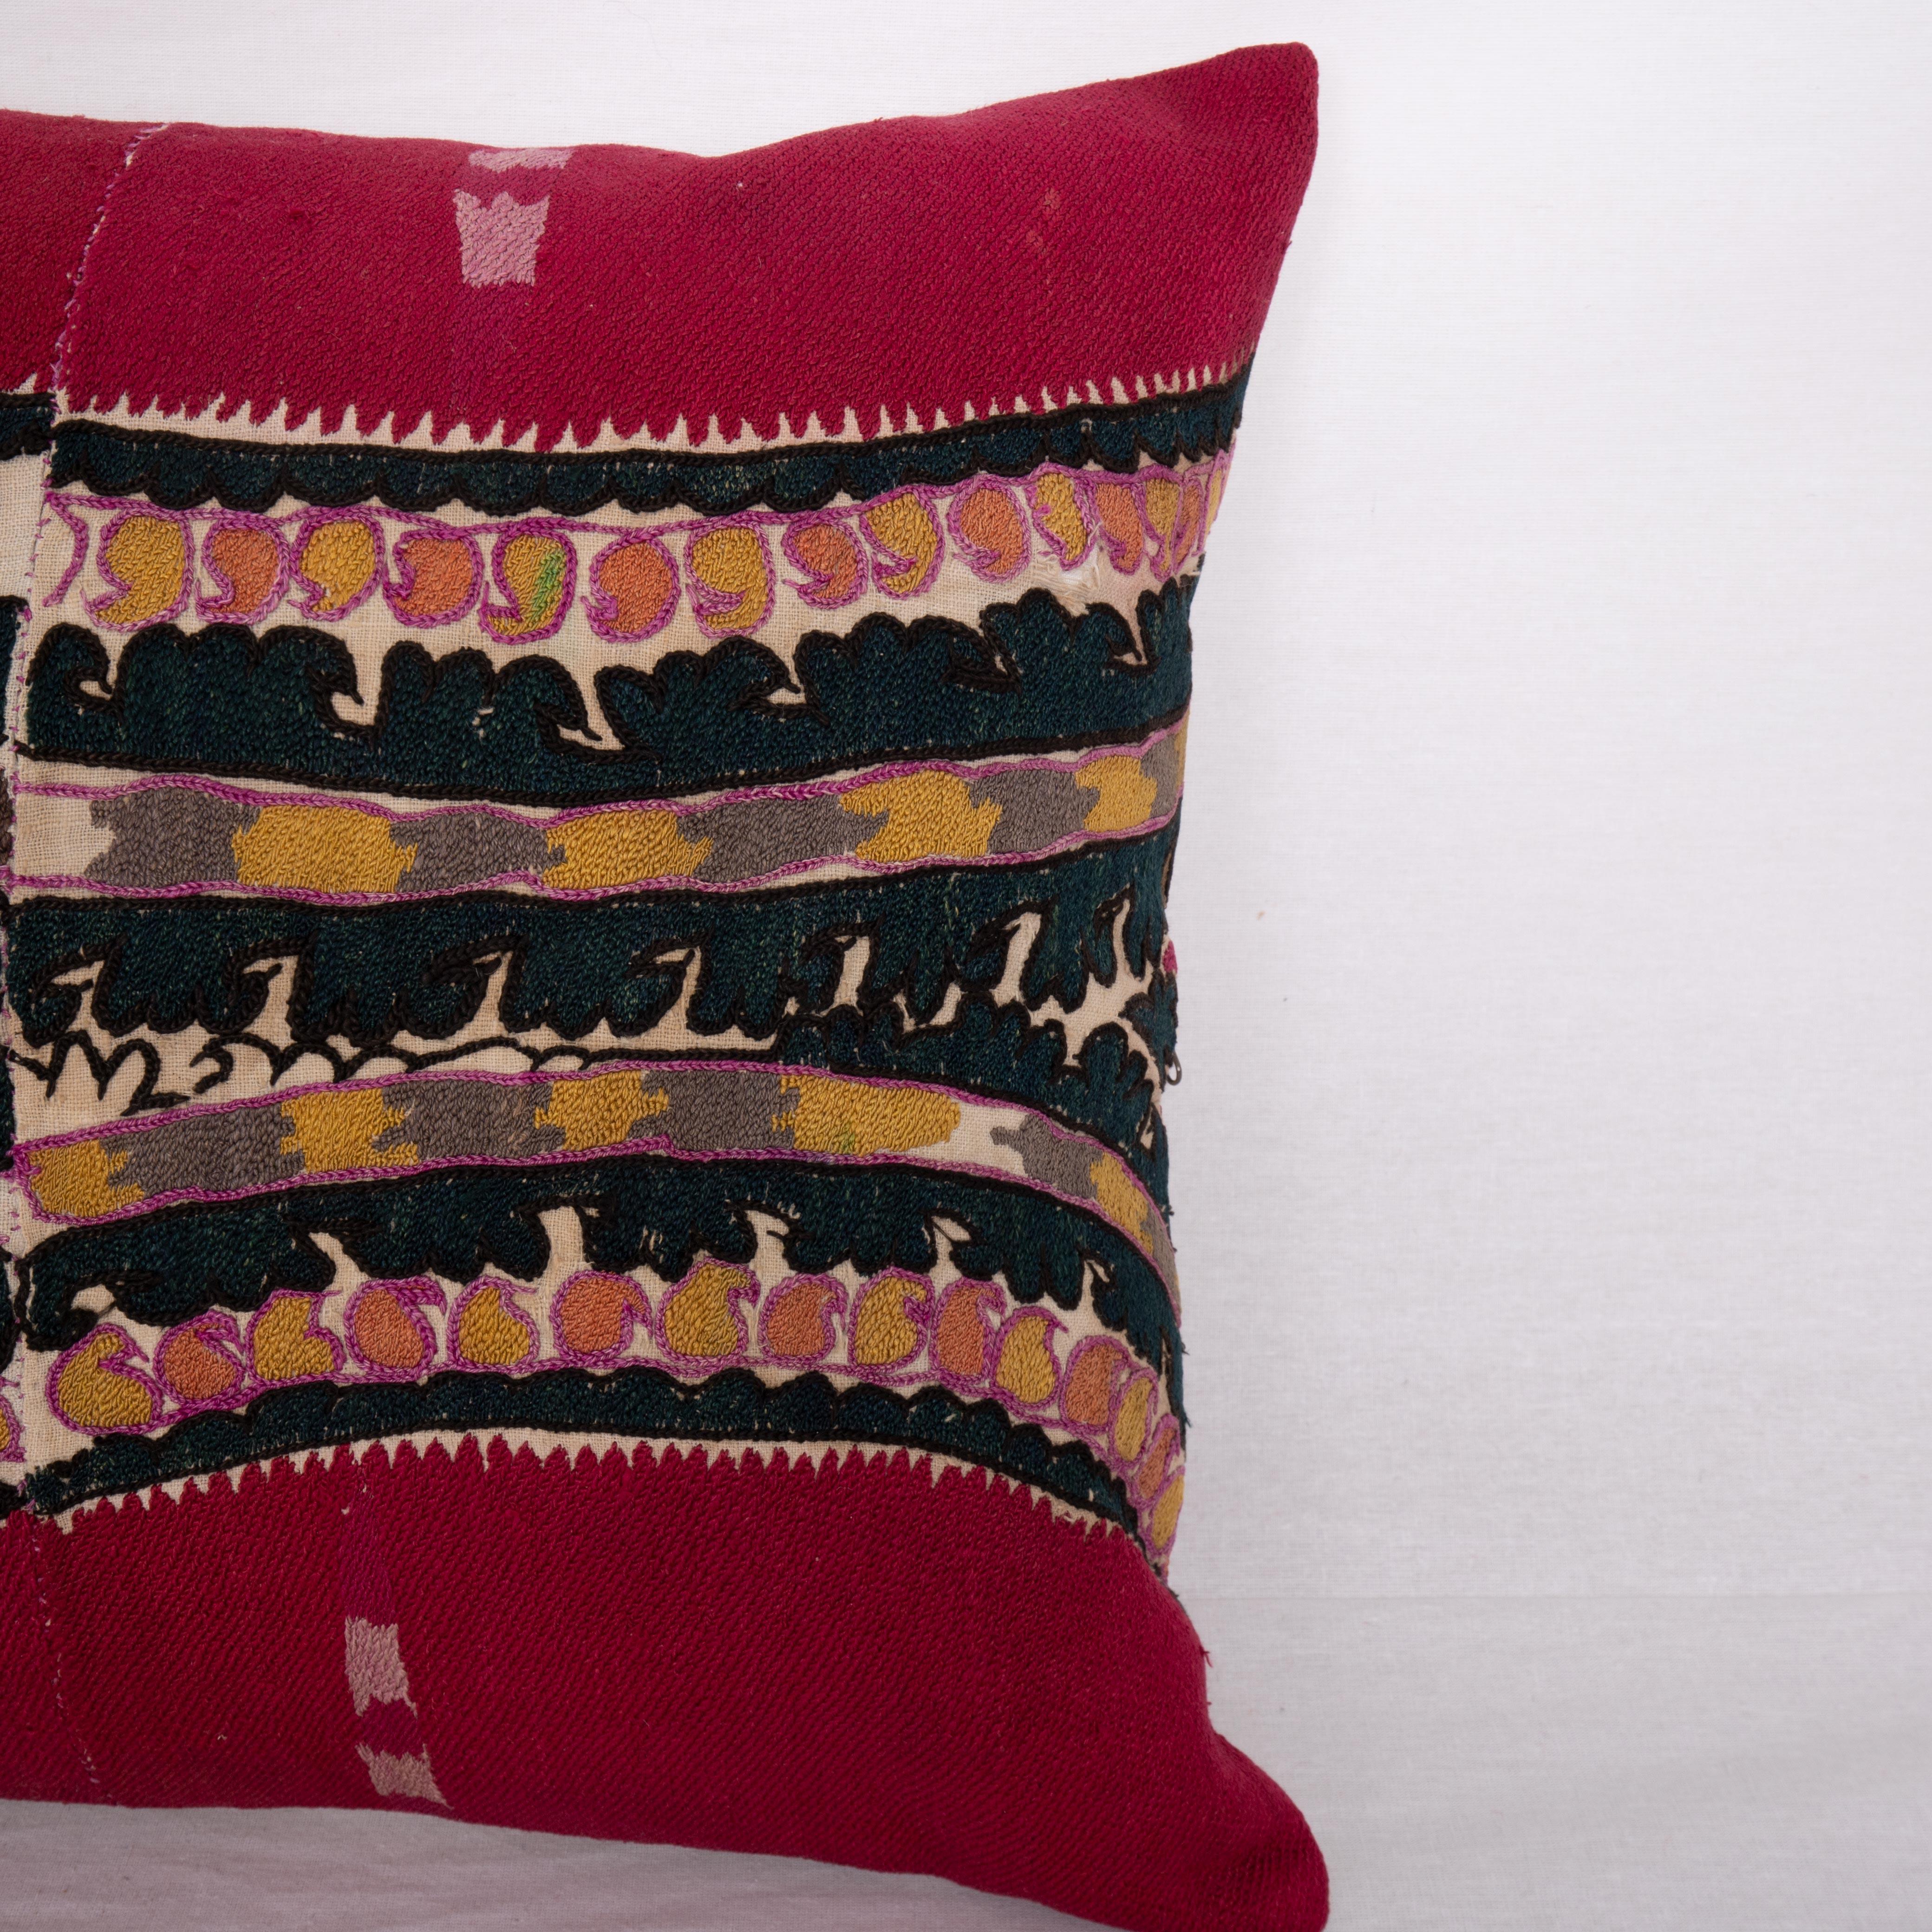 Embroidered Suzani Pillow Cover Made from Late 19th Century Tashkent Suzani